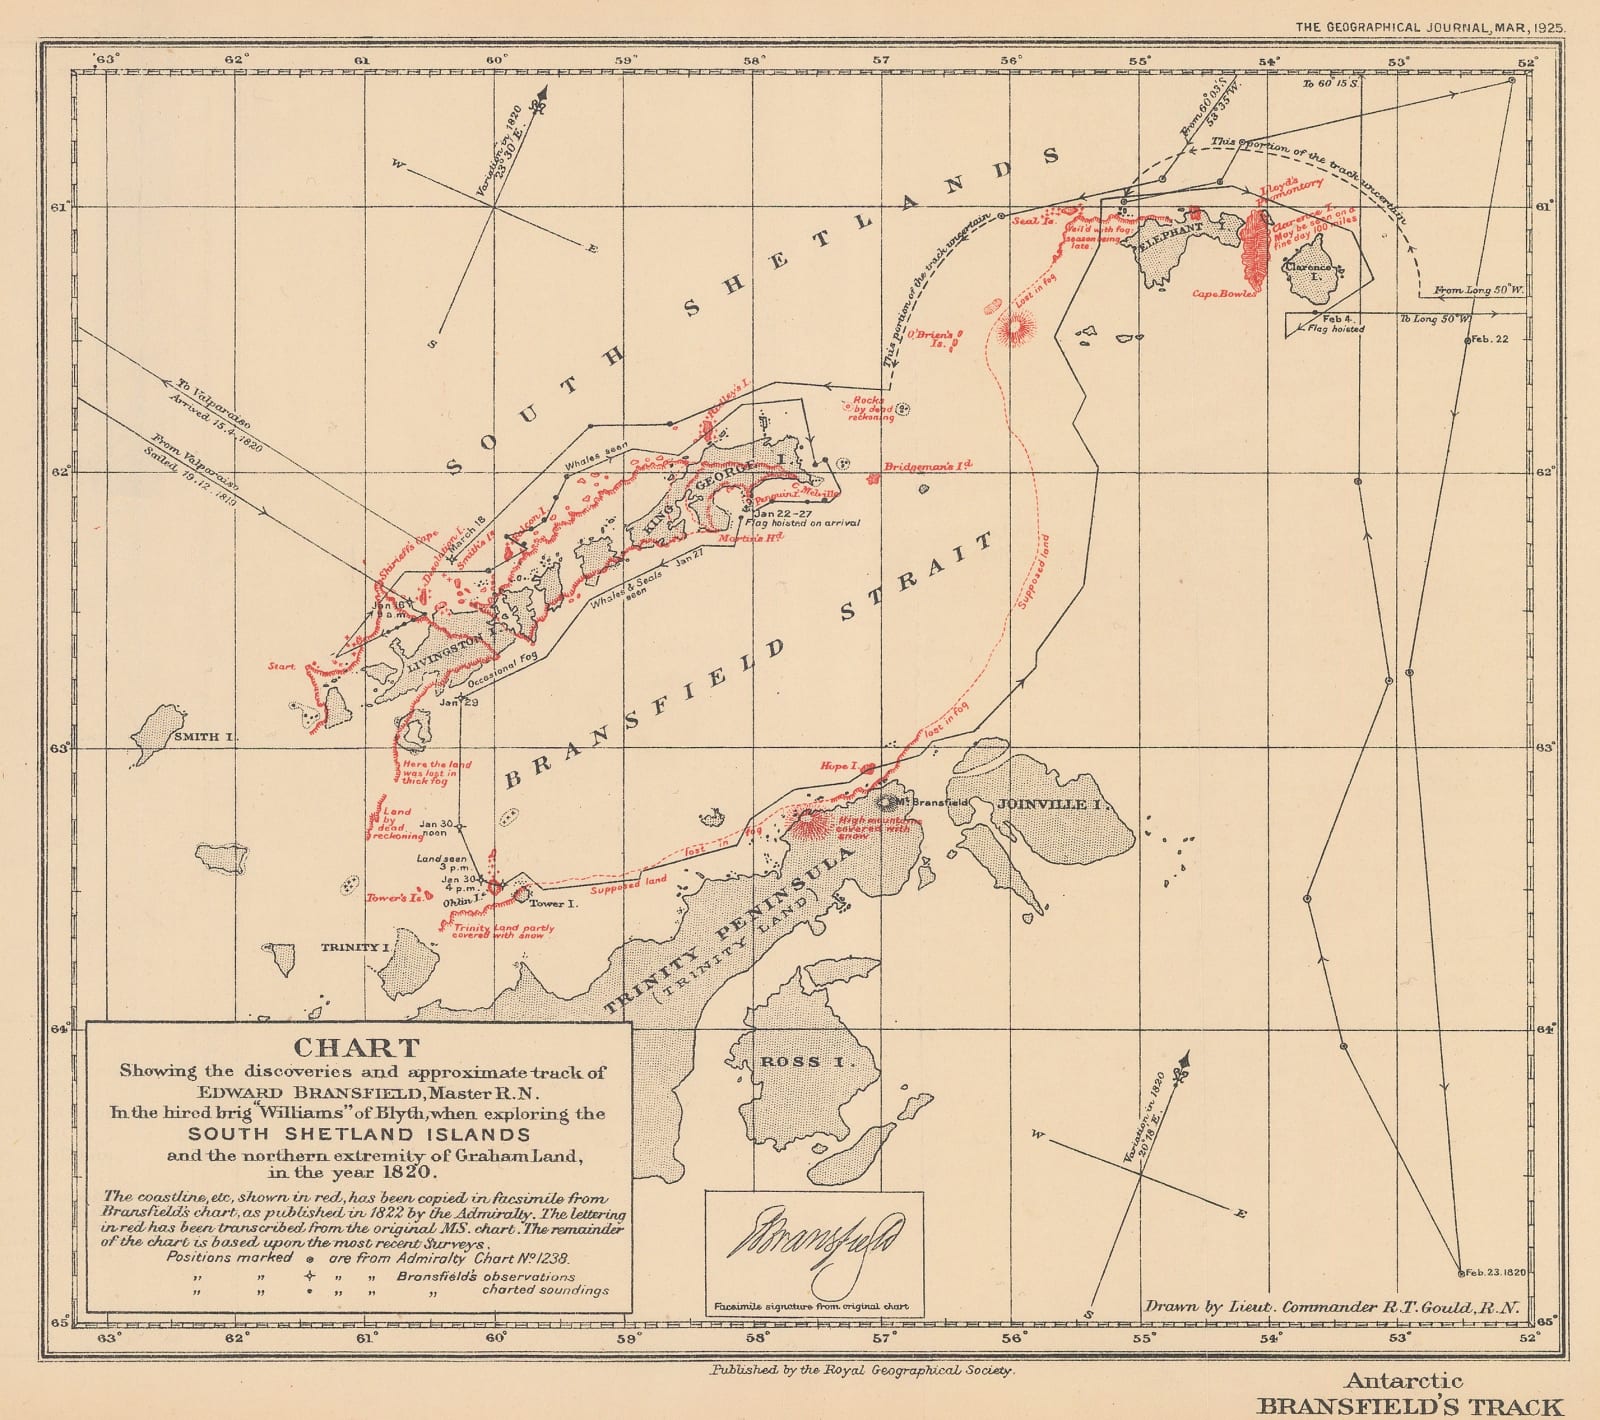 Royal Geographical Society (RGS), Chart Showing the discoveries and ...